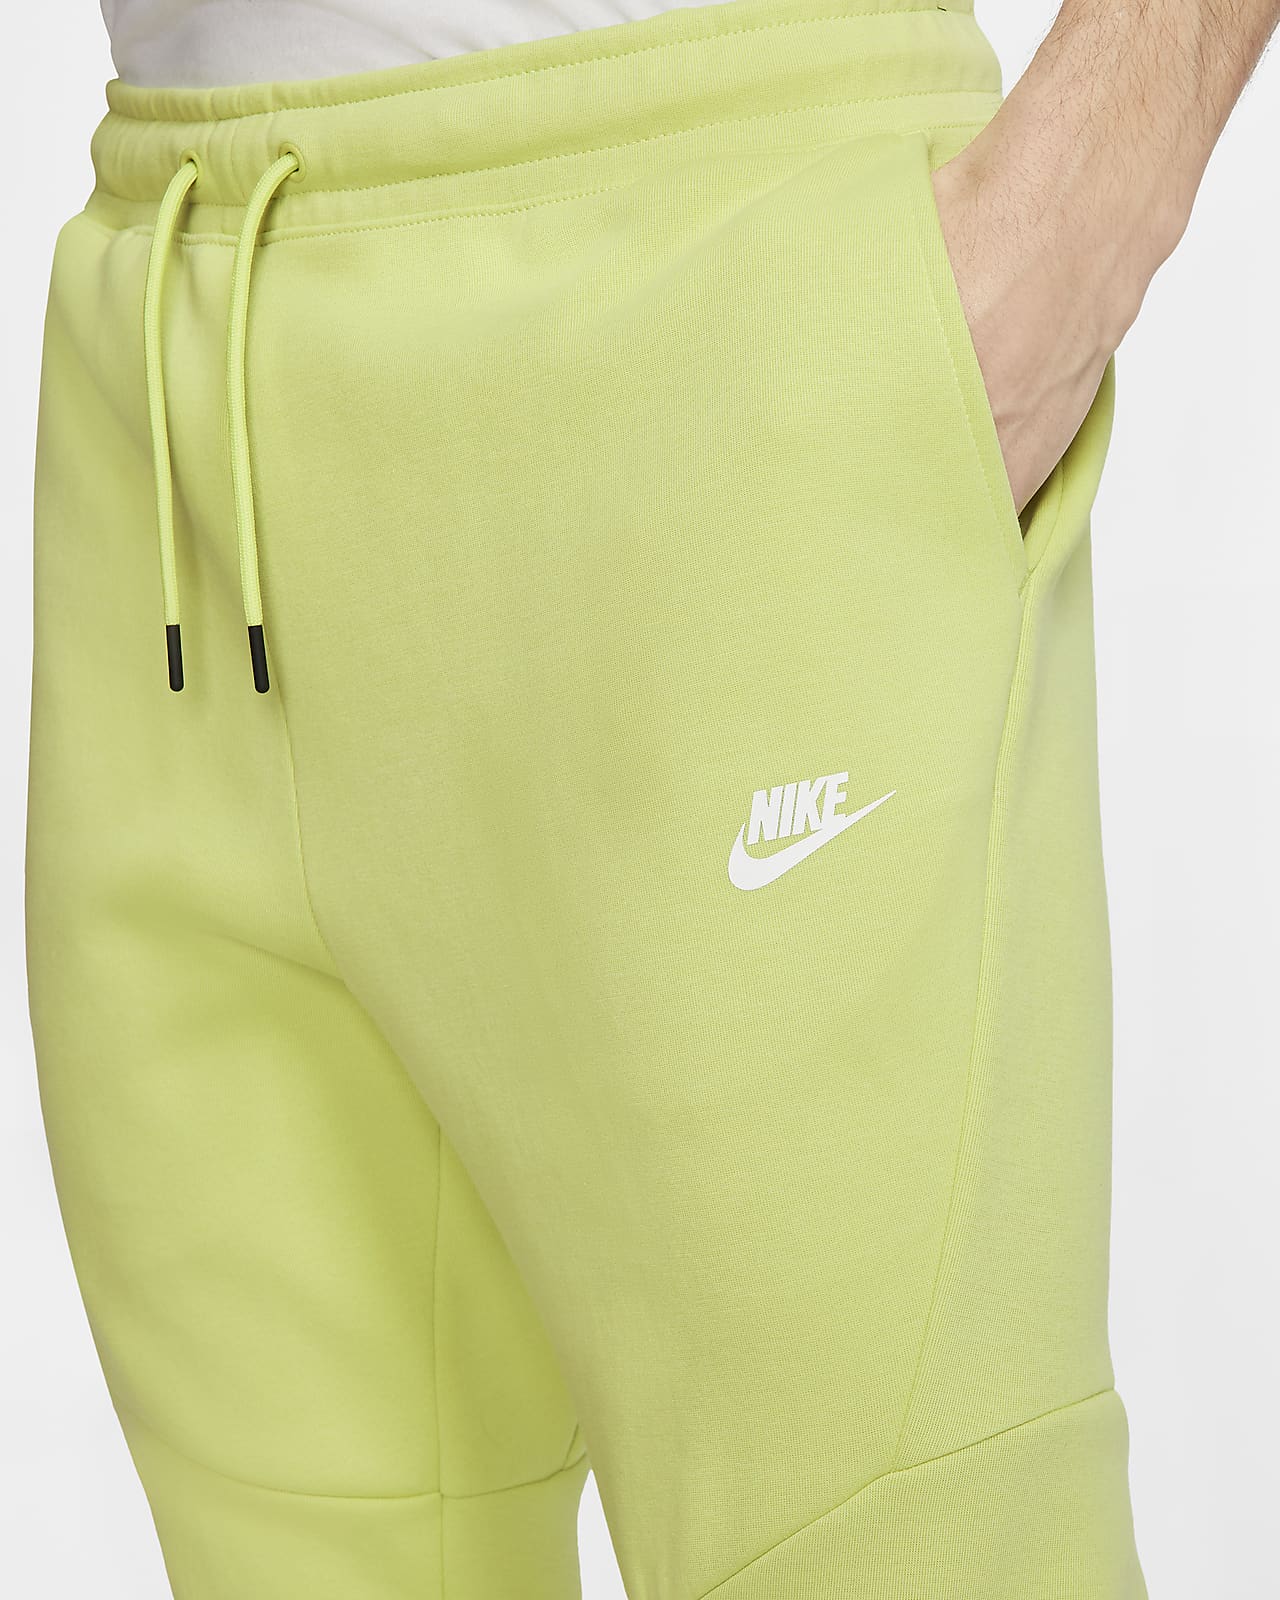 black and yellow nike joggers